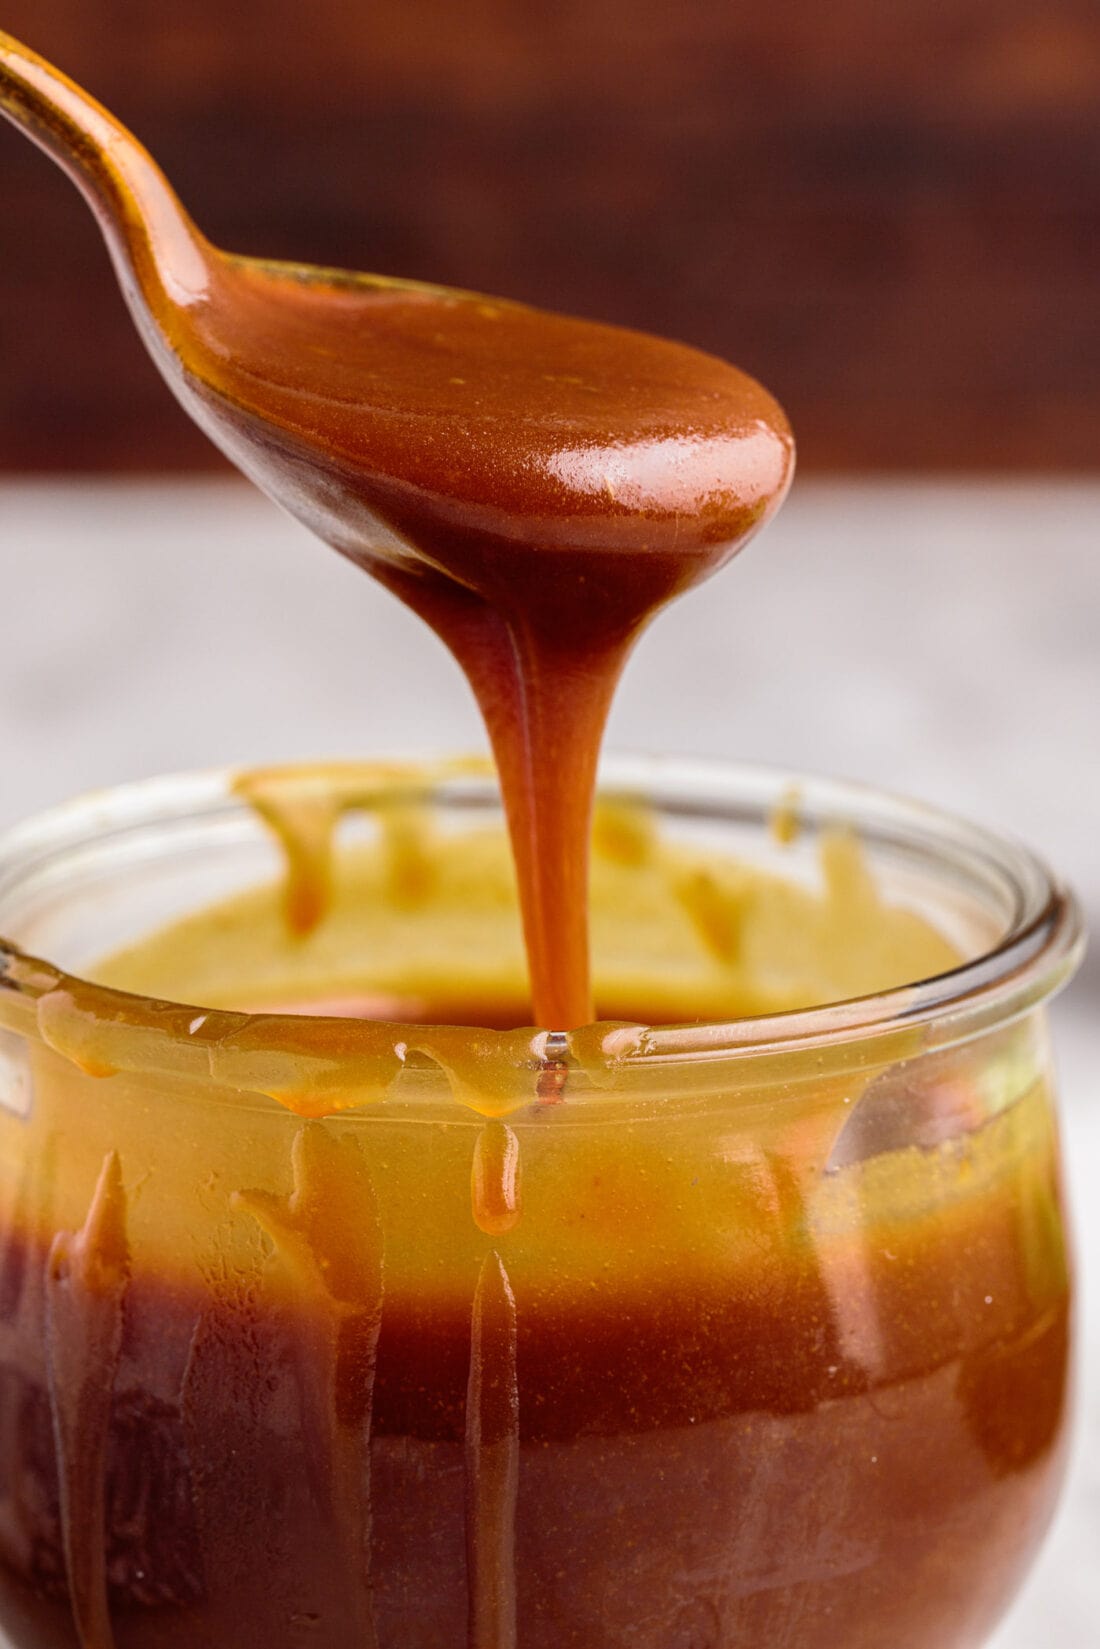 Spooning out some Caramel Sauce from a jar